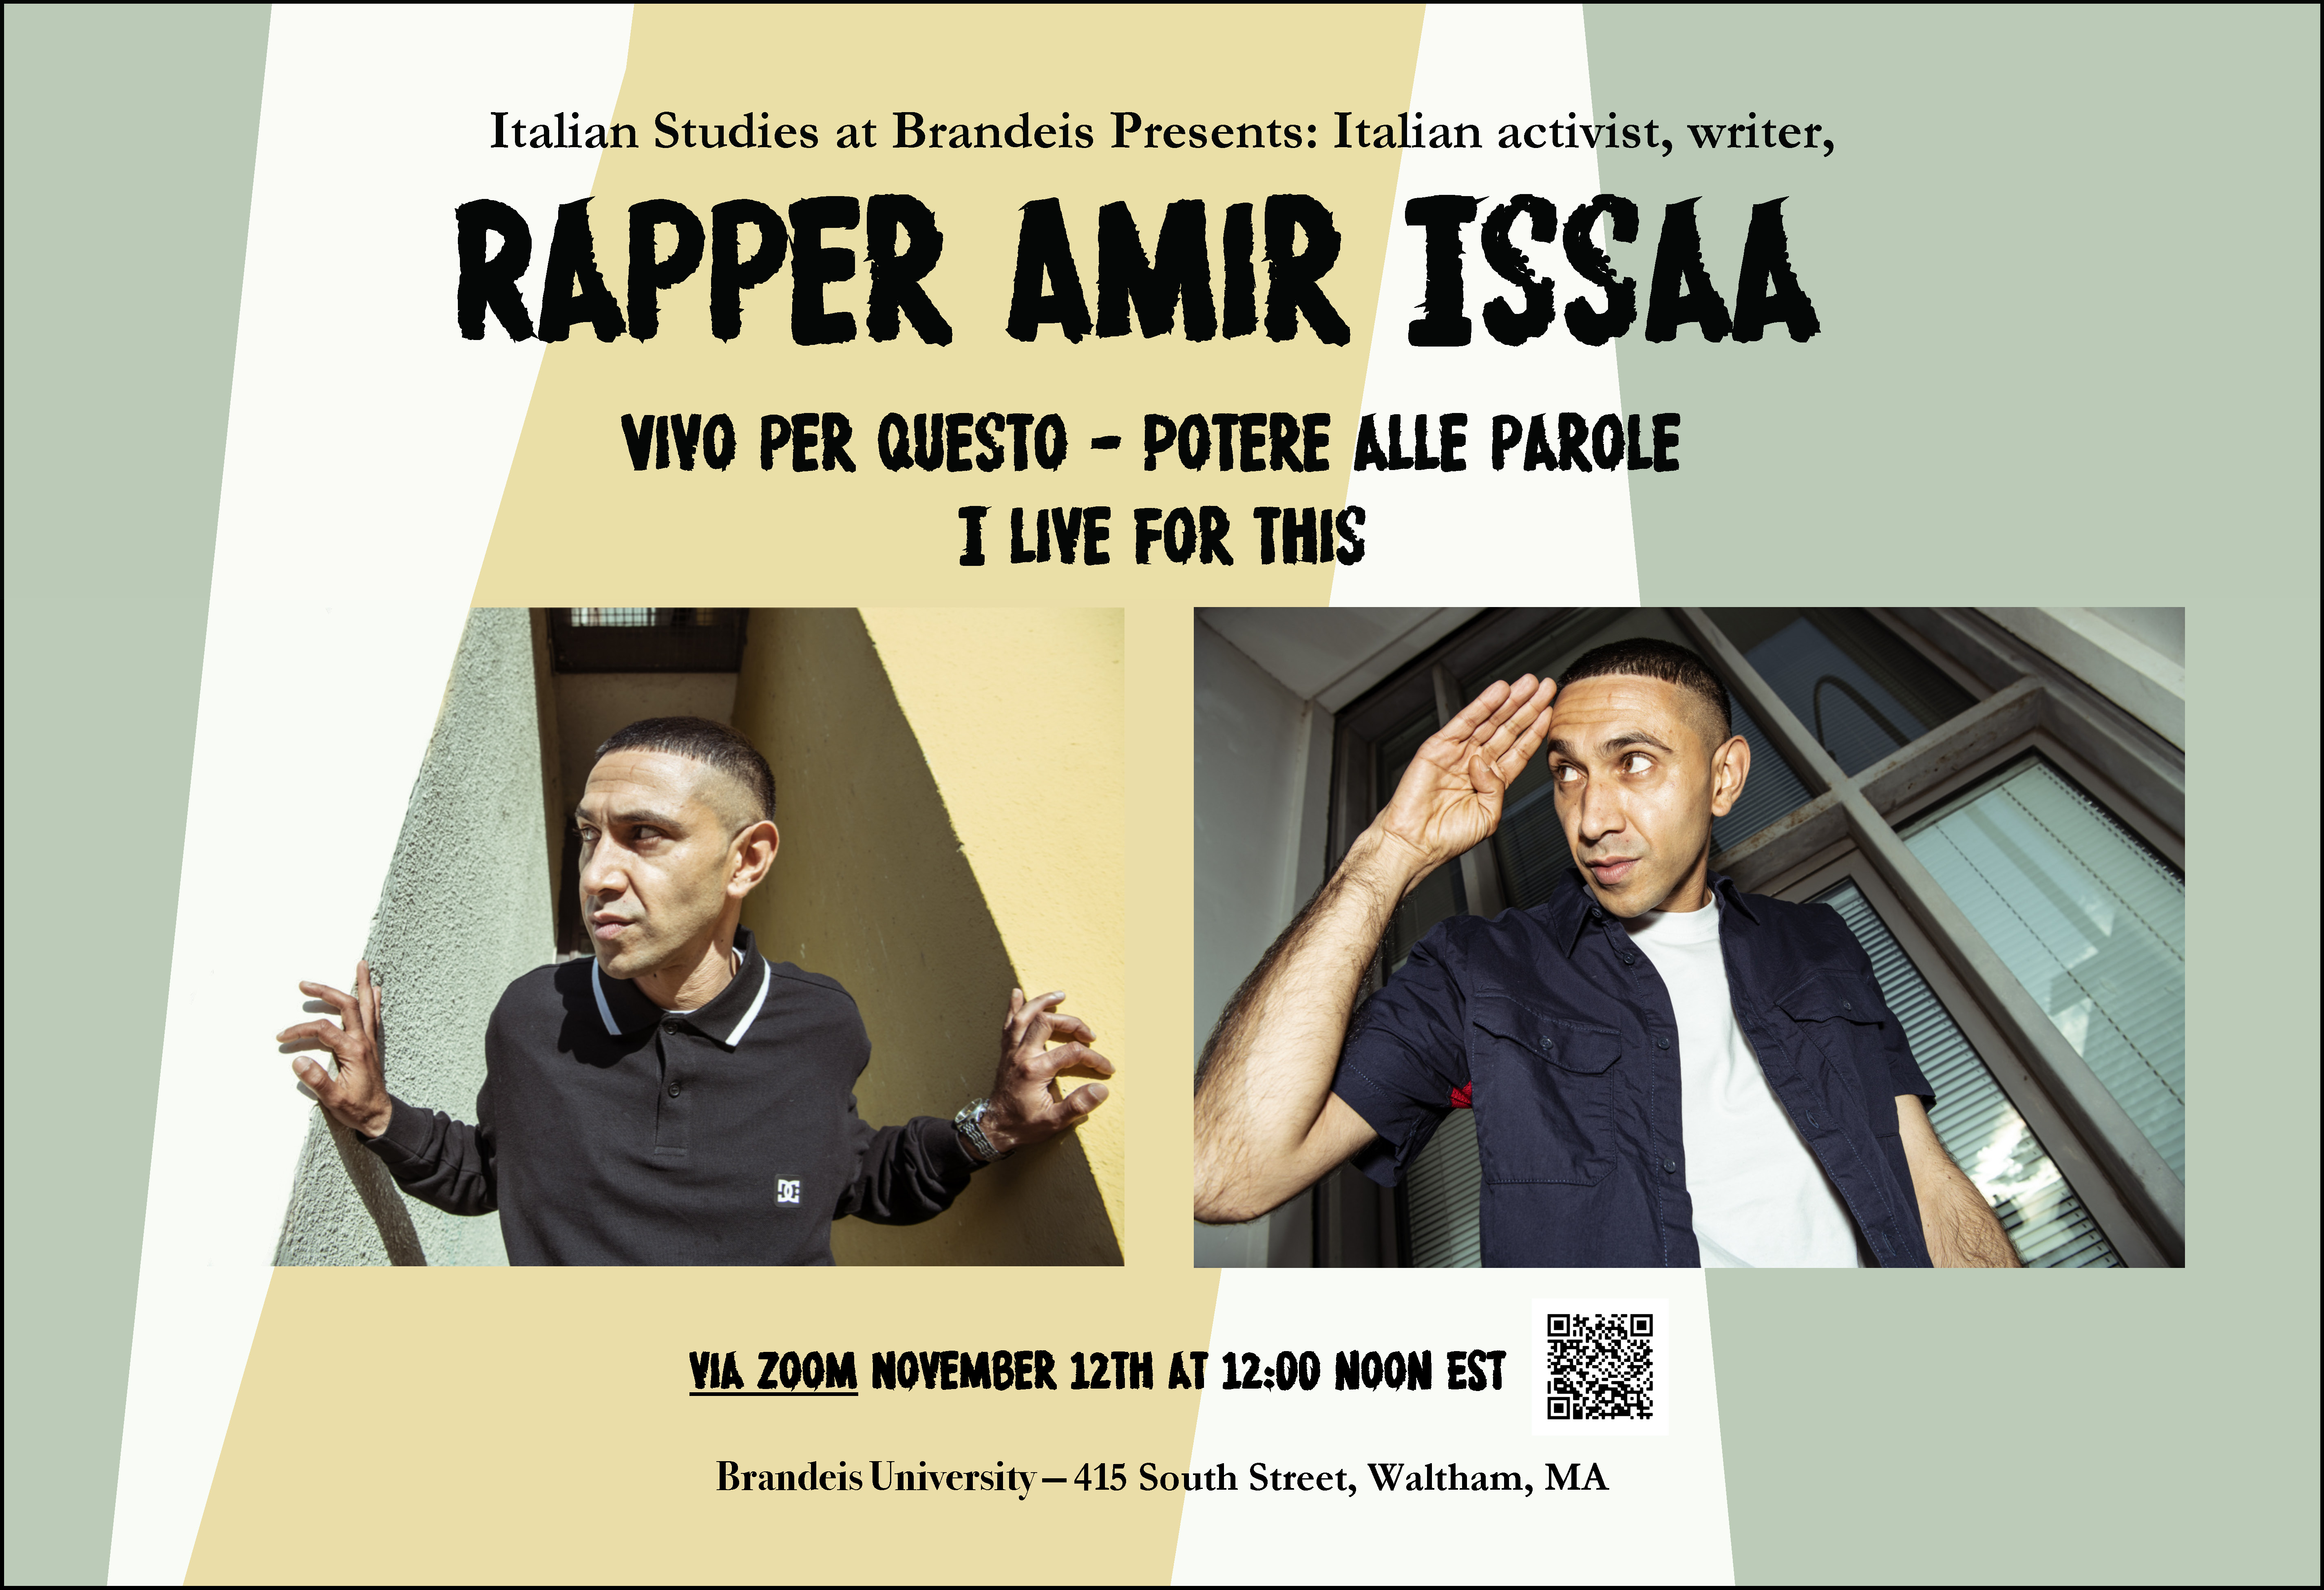 poster for Rapper Amir Issaa event including two photos of him